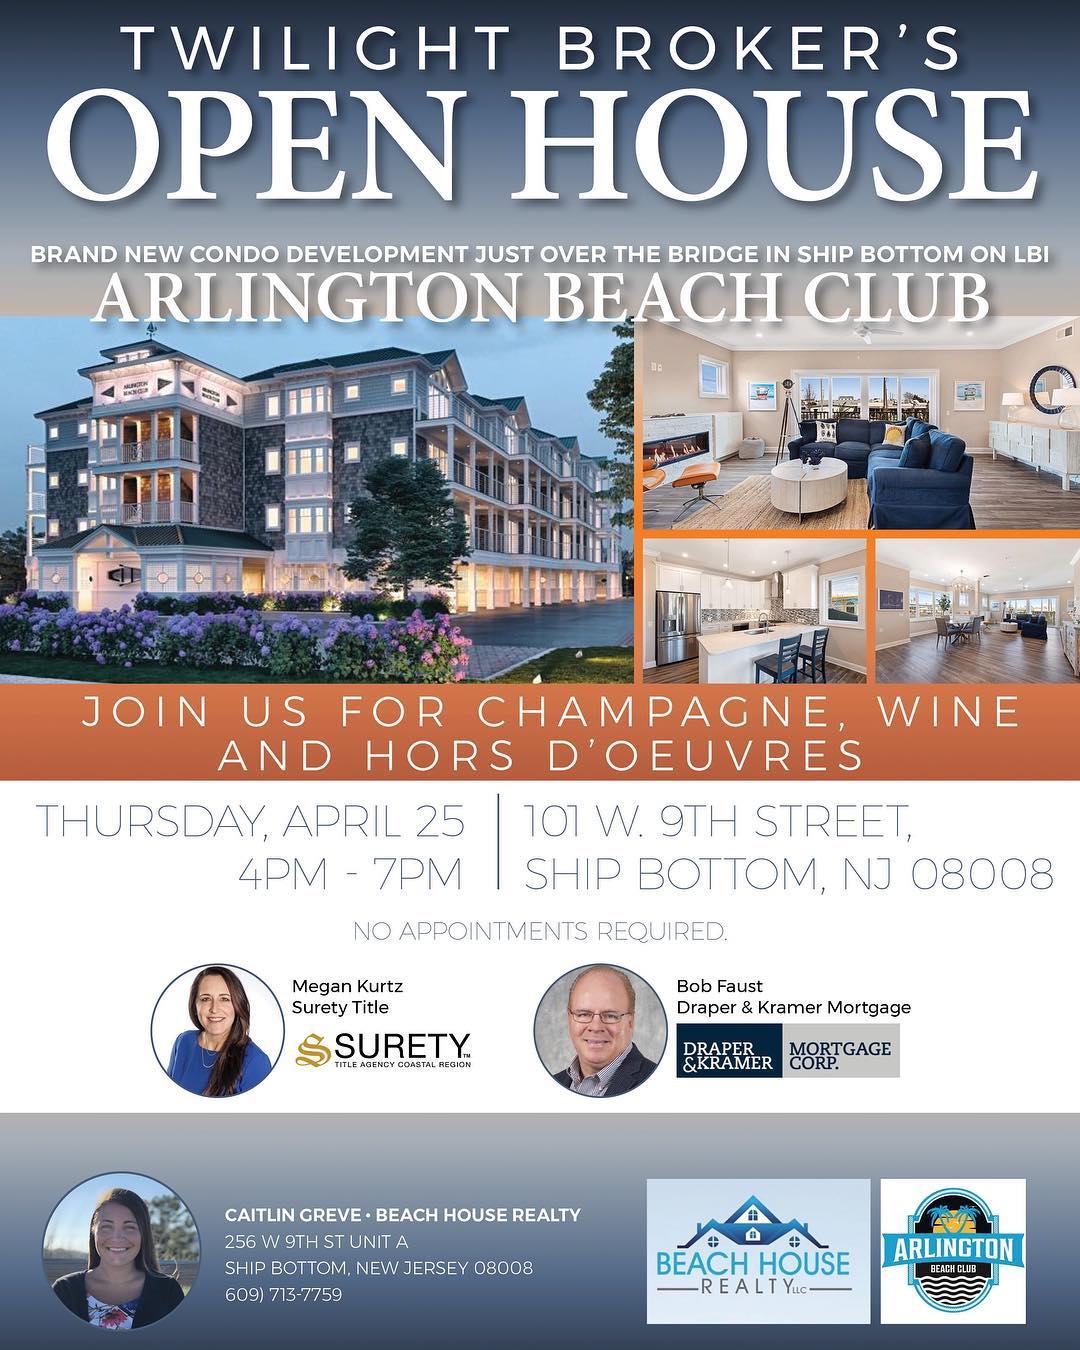 Broker’s Open House at the Arlington Beach Club this Thursday from 4-7pm! .
.
.
...